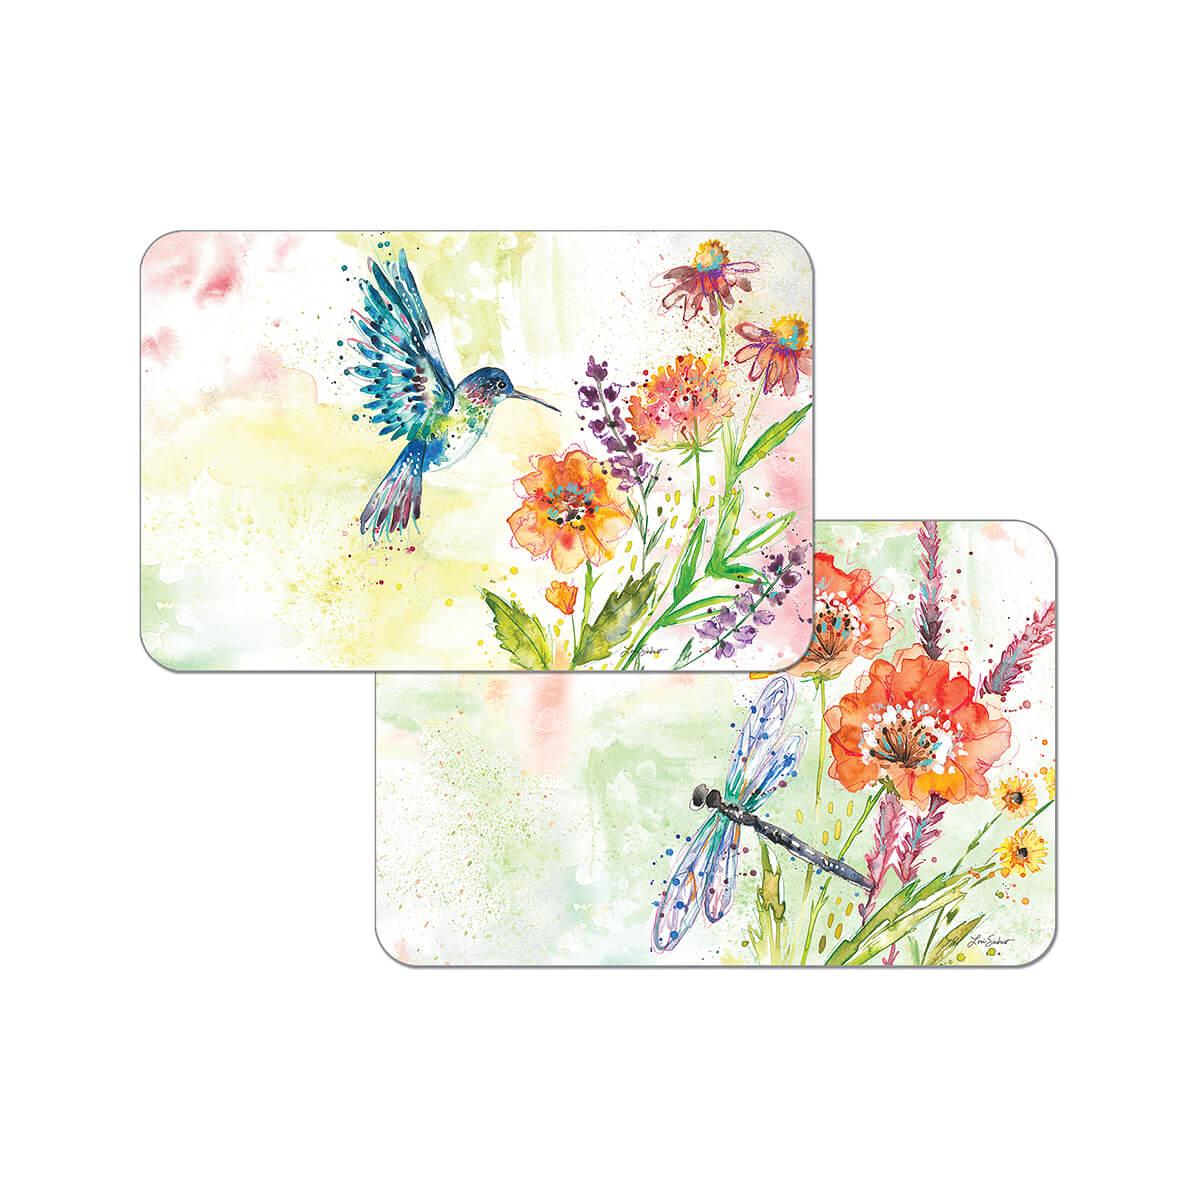  Fanciful Flight Reversible Placemat